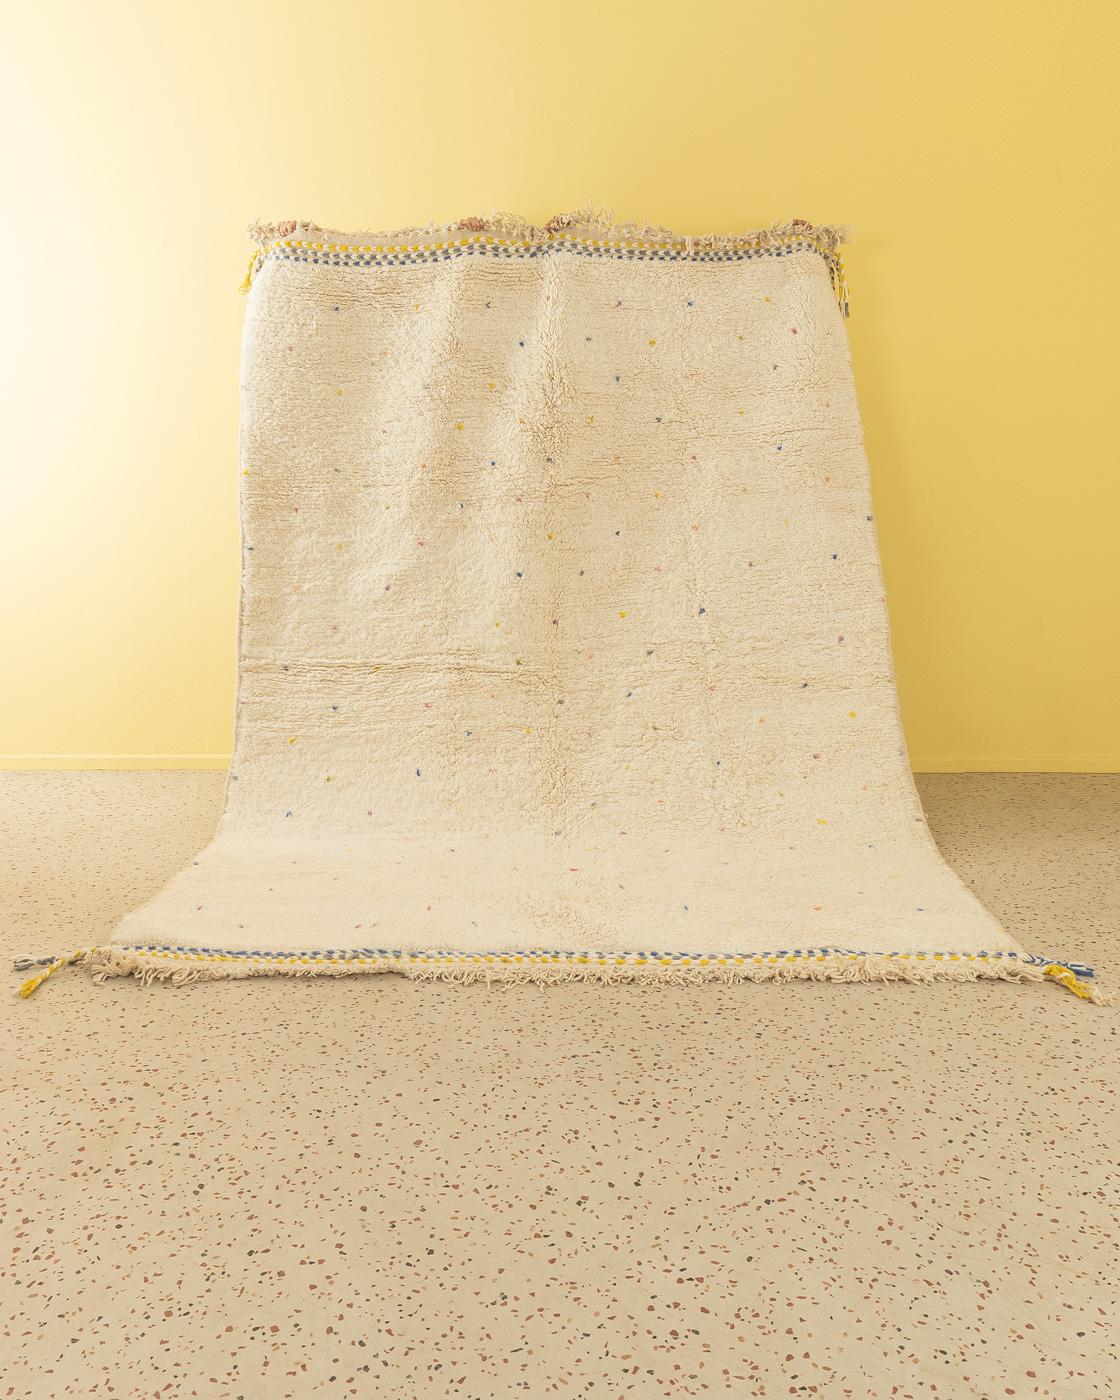 Tiny Dots is a contemporary 100% wool rug – thick and soft, comfortable underfoot. Our Berber rugs are handwoven and handknotted by Amazigh women in the Atlas Mountains. These communities have been crafting rugs for thousands of years. One knot at a